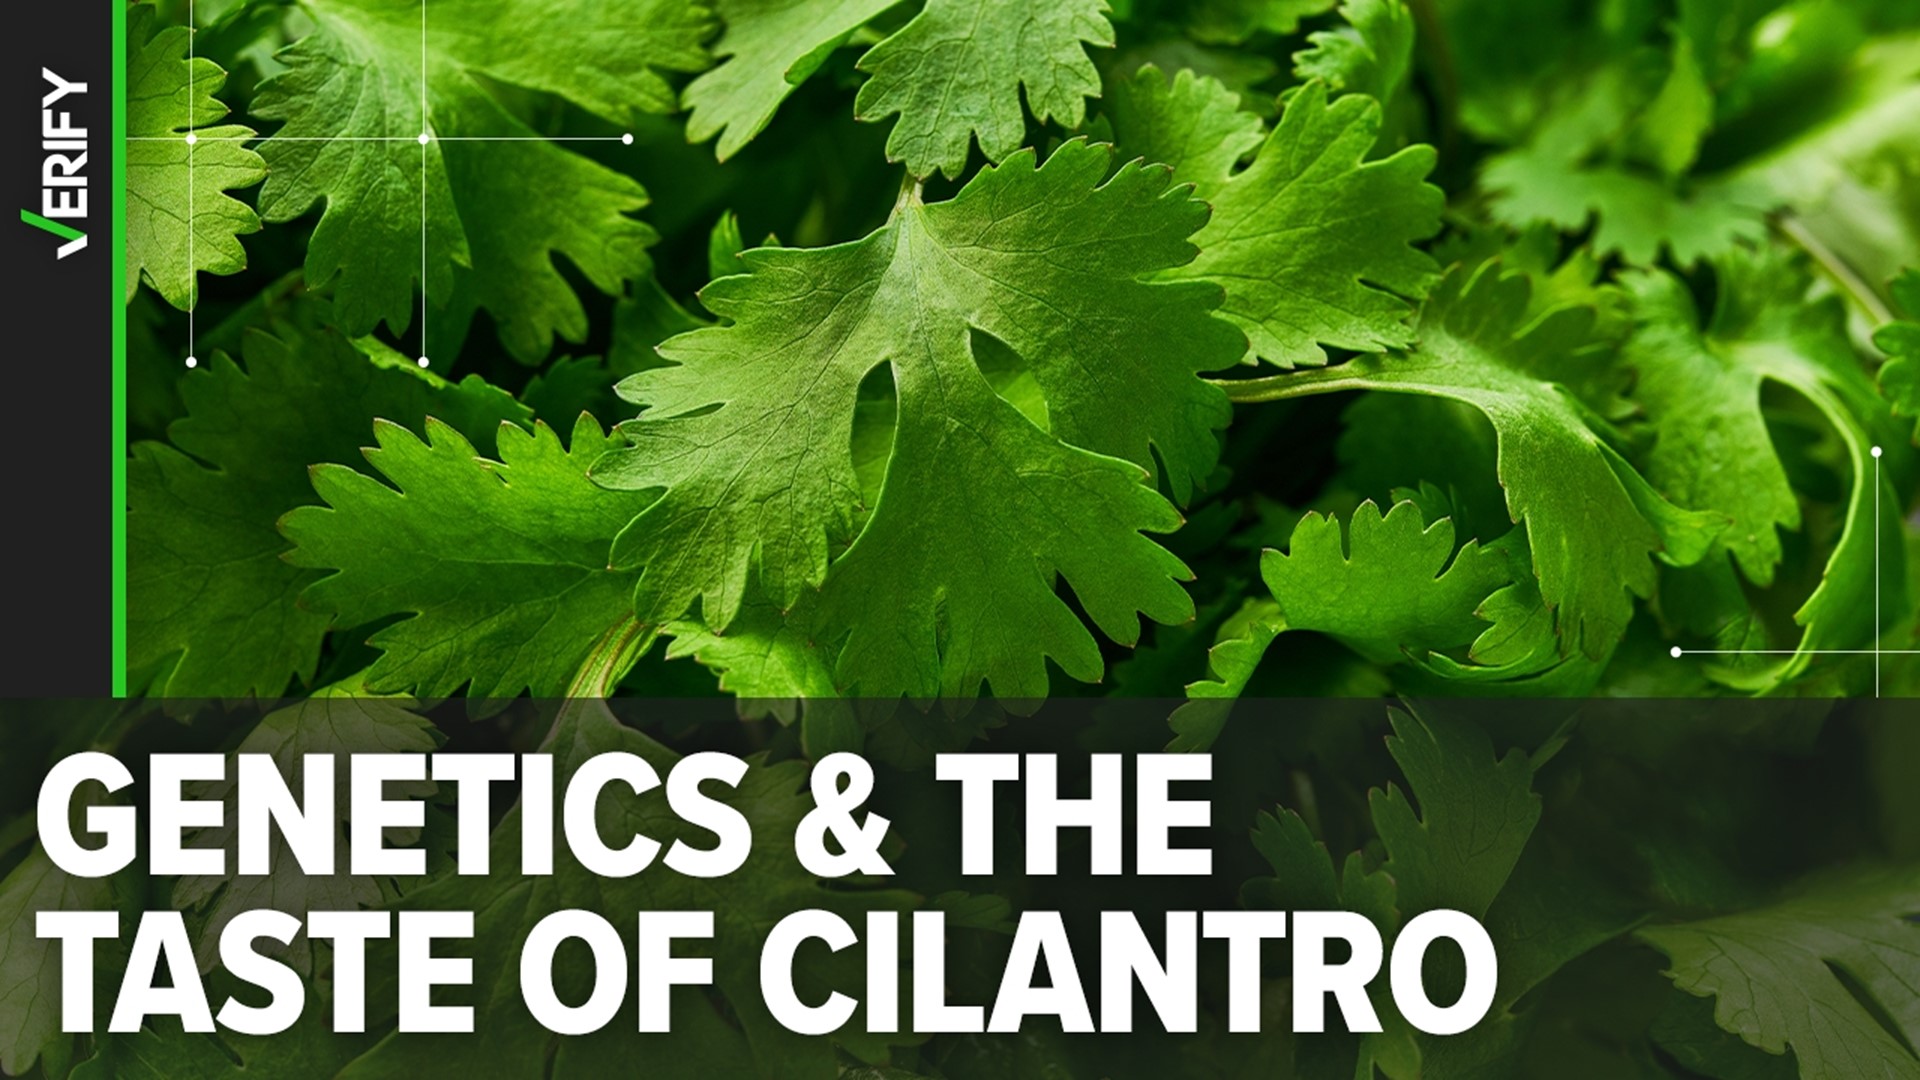 Genetic studies show that taste receptor variants can cause cilantro dislike, but there may be other factors too.